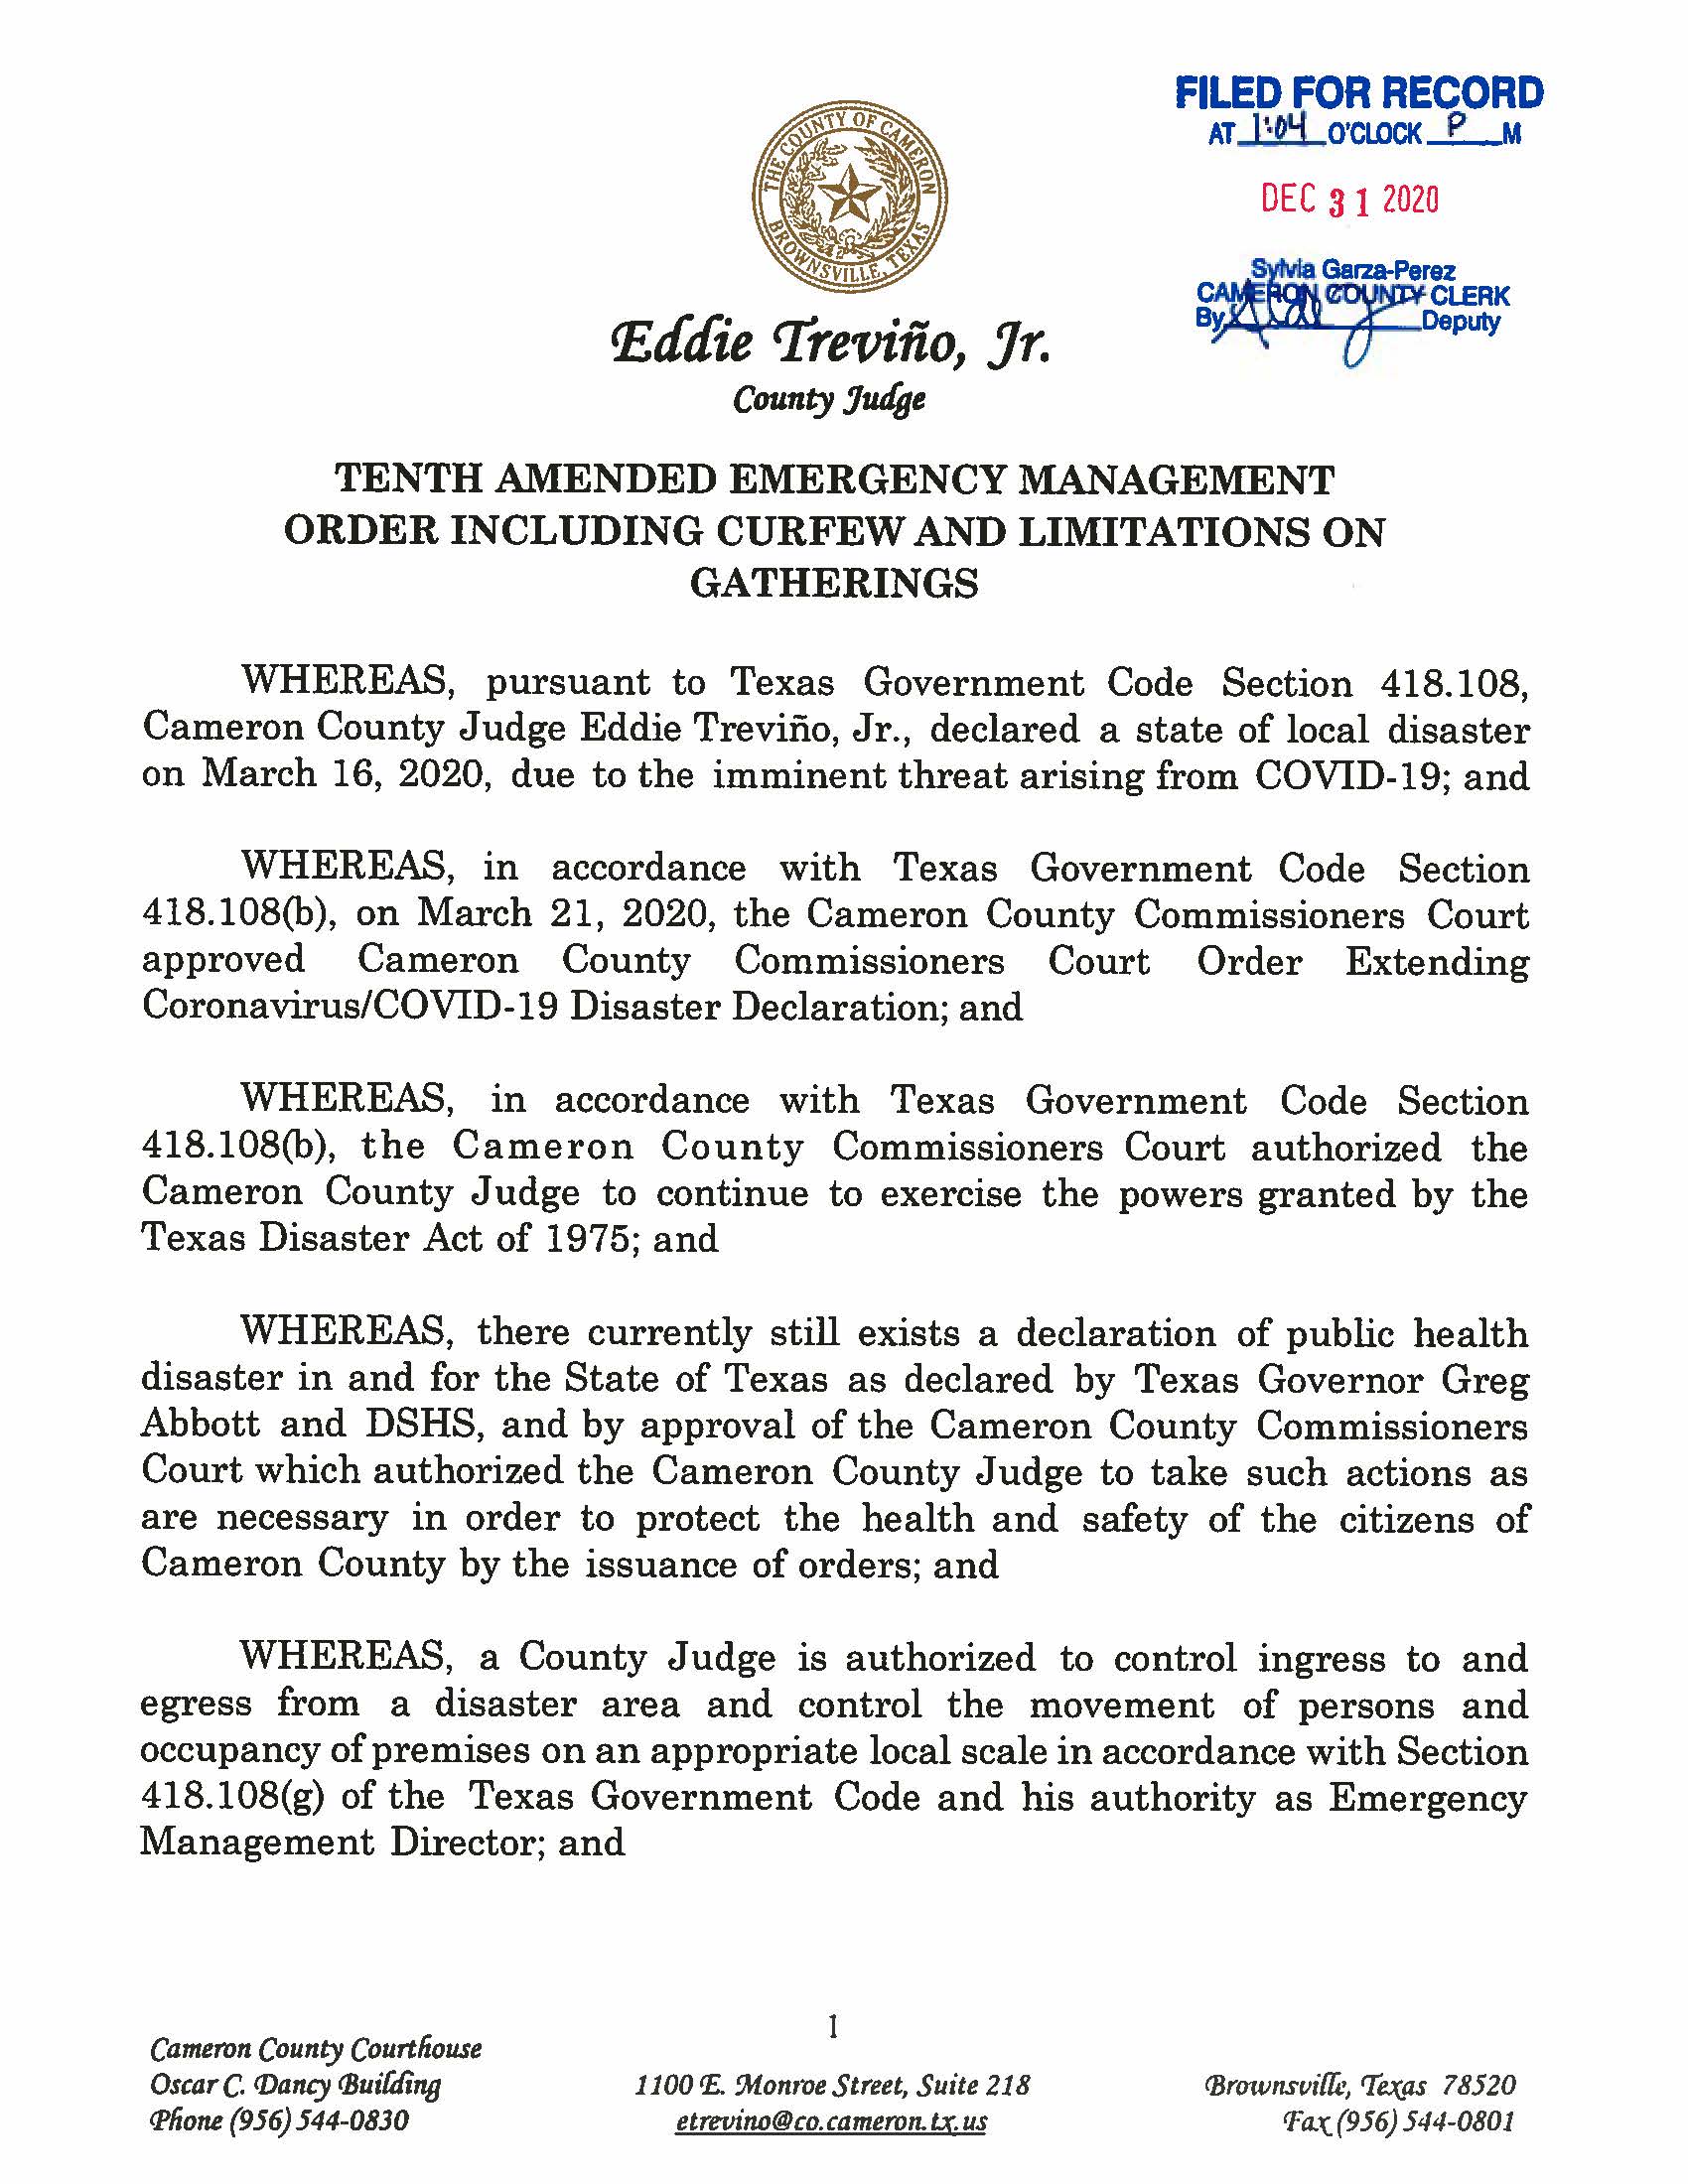 12.31.2020 ORDER Tenth Amended Emergency Management Order Including Curfew And Limitations On Gatherings Page 01